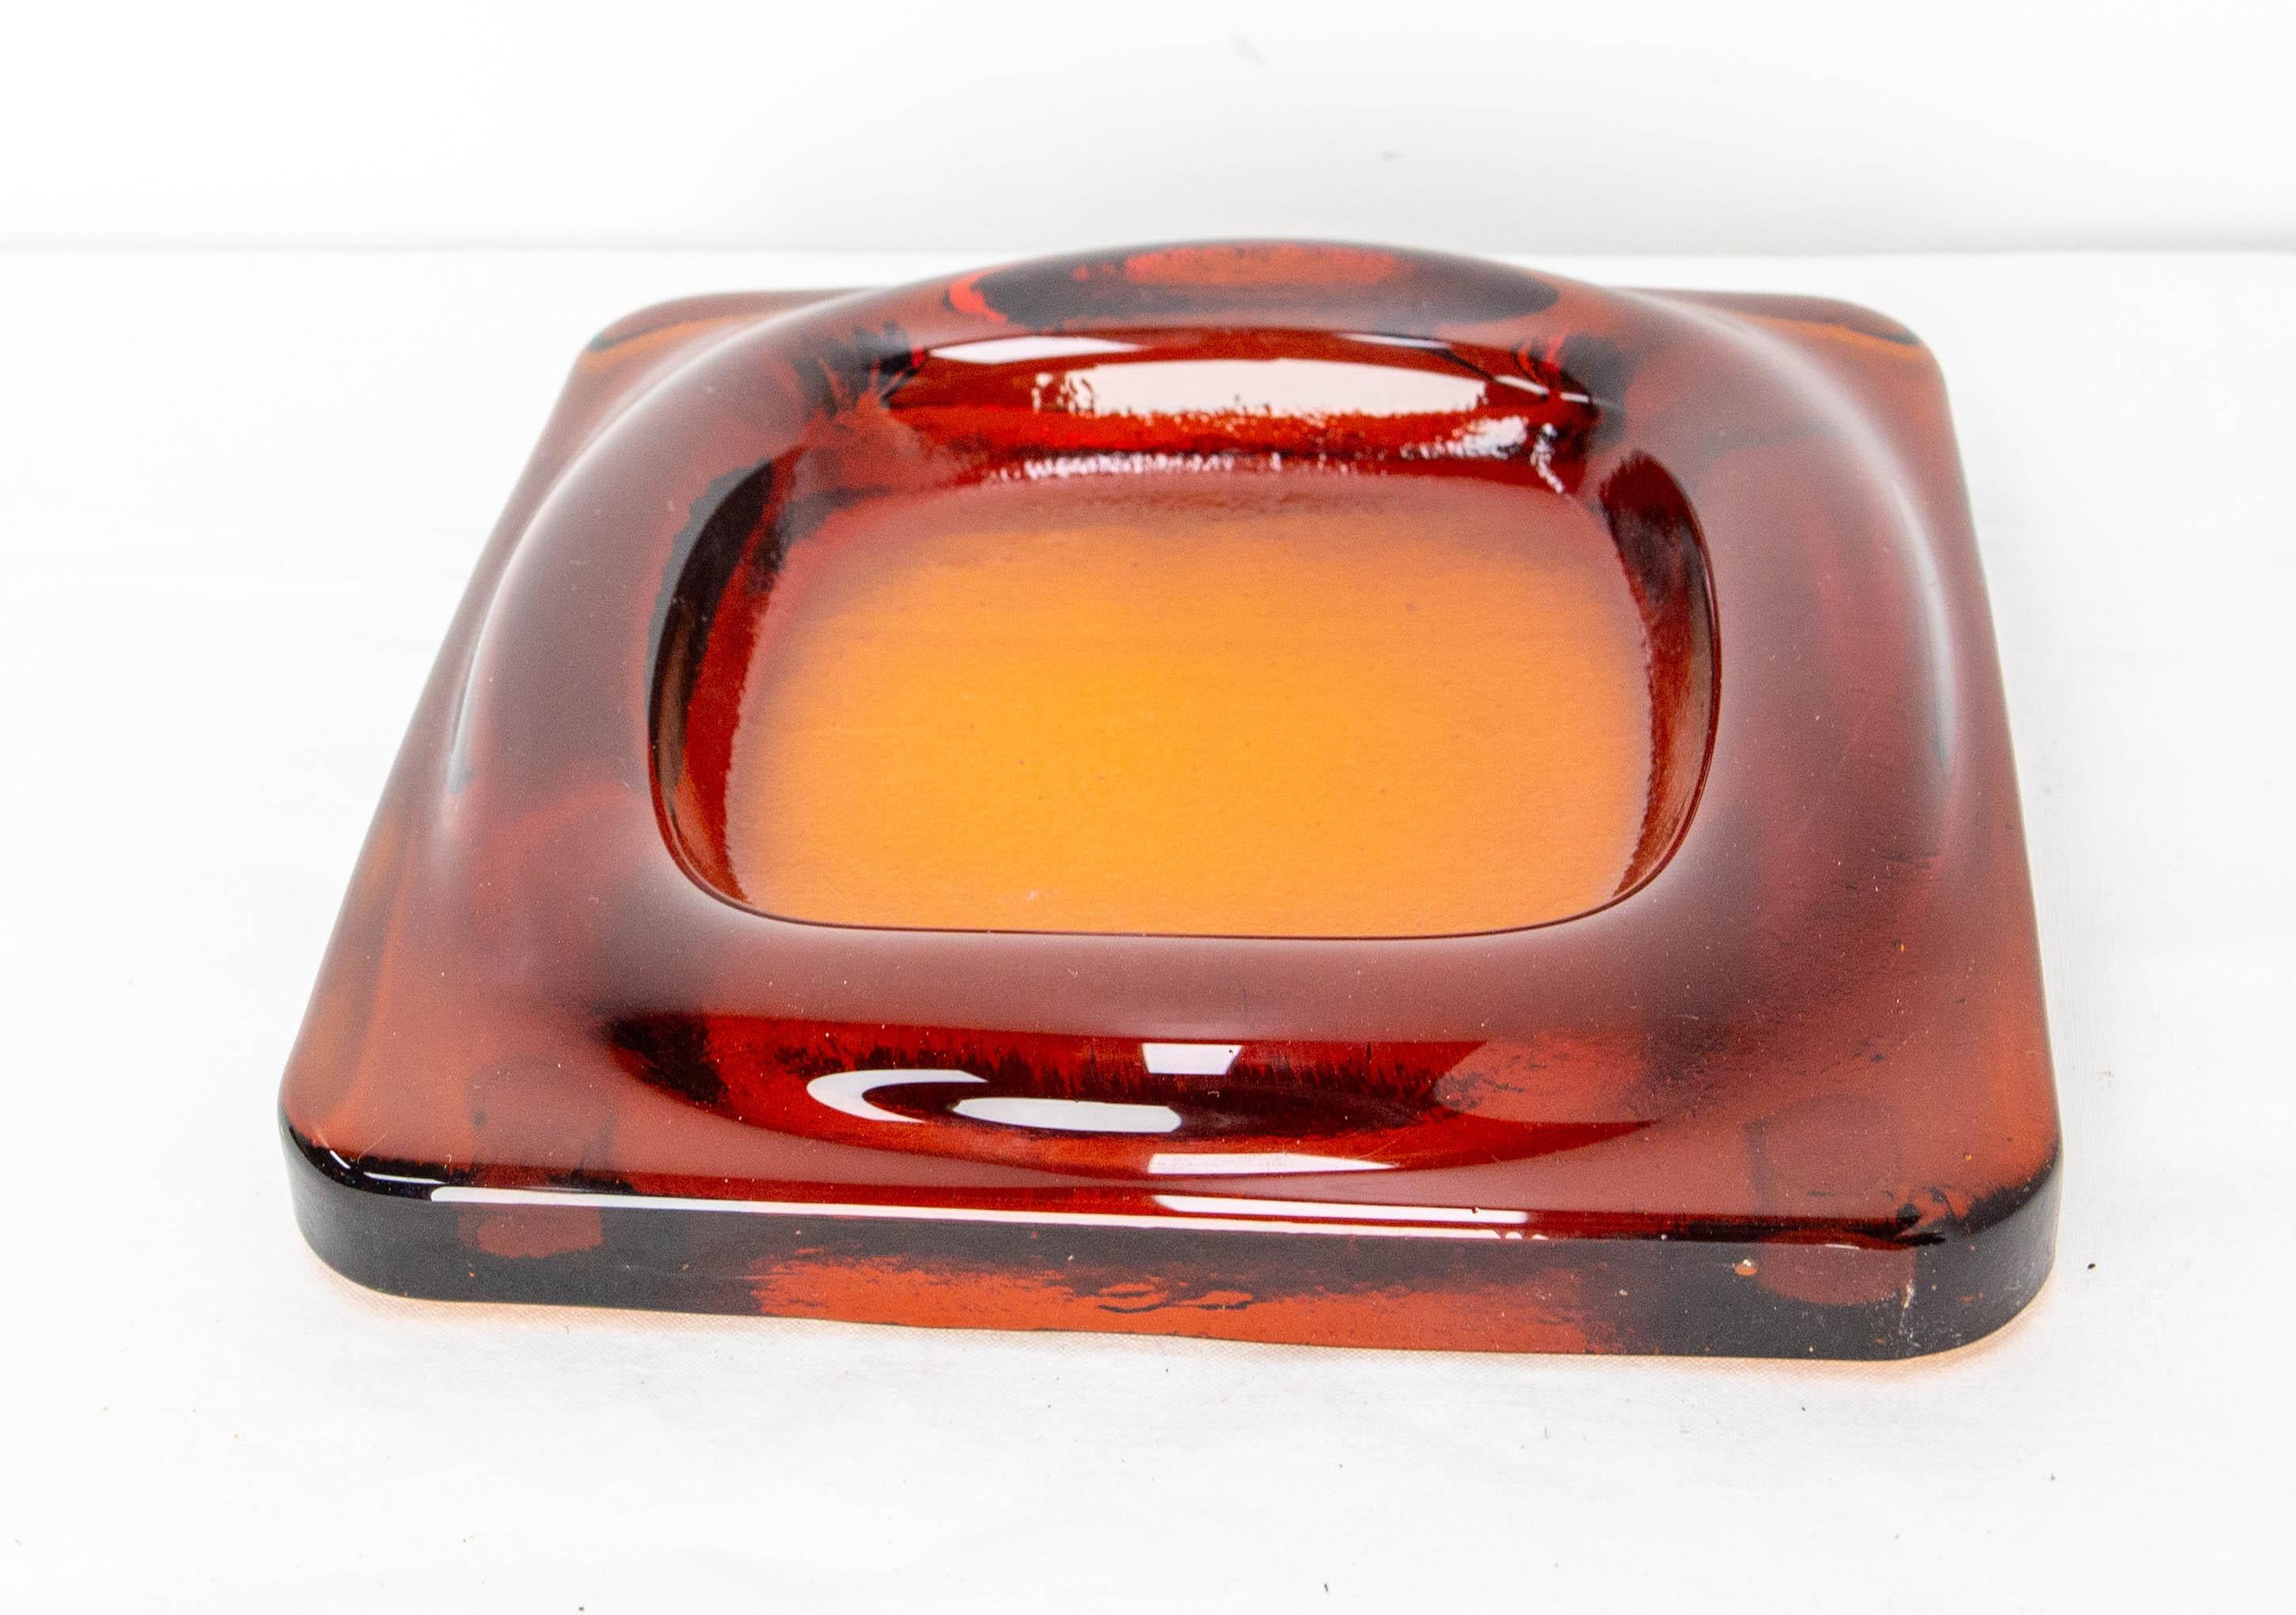 French brown glass ashtray or empty pocket, circa 1970.
Massive glass, smooth on the sides and more textured in the center.
Excellent condition.


